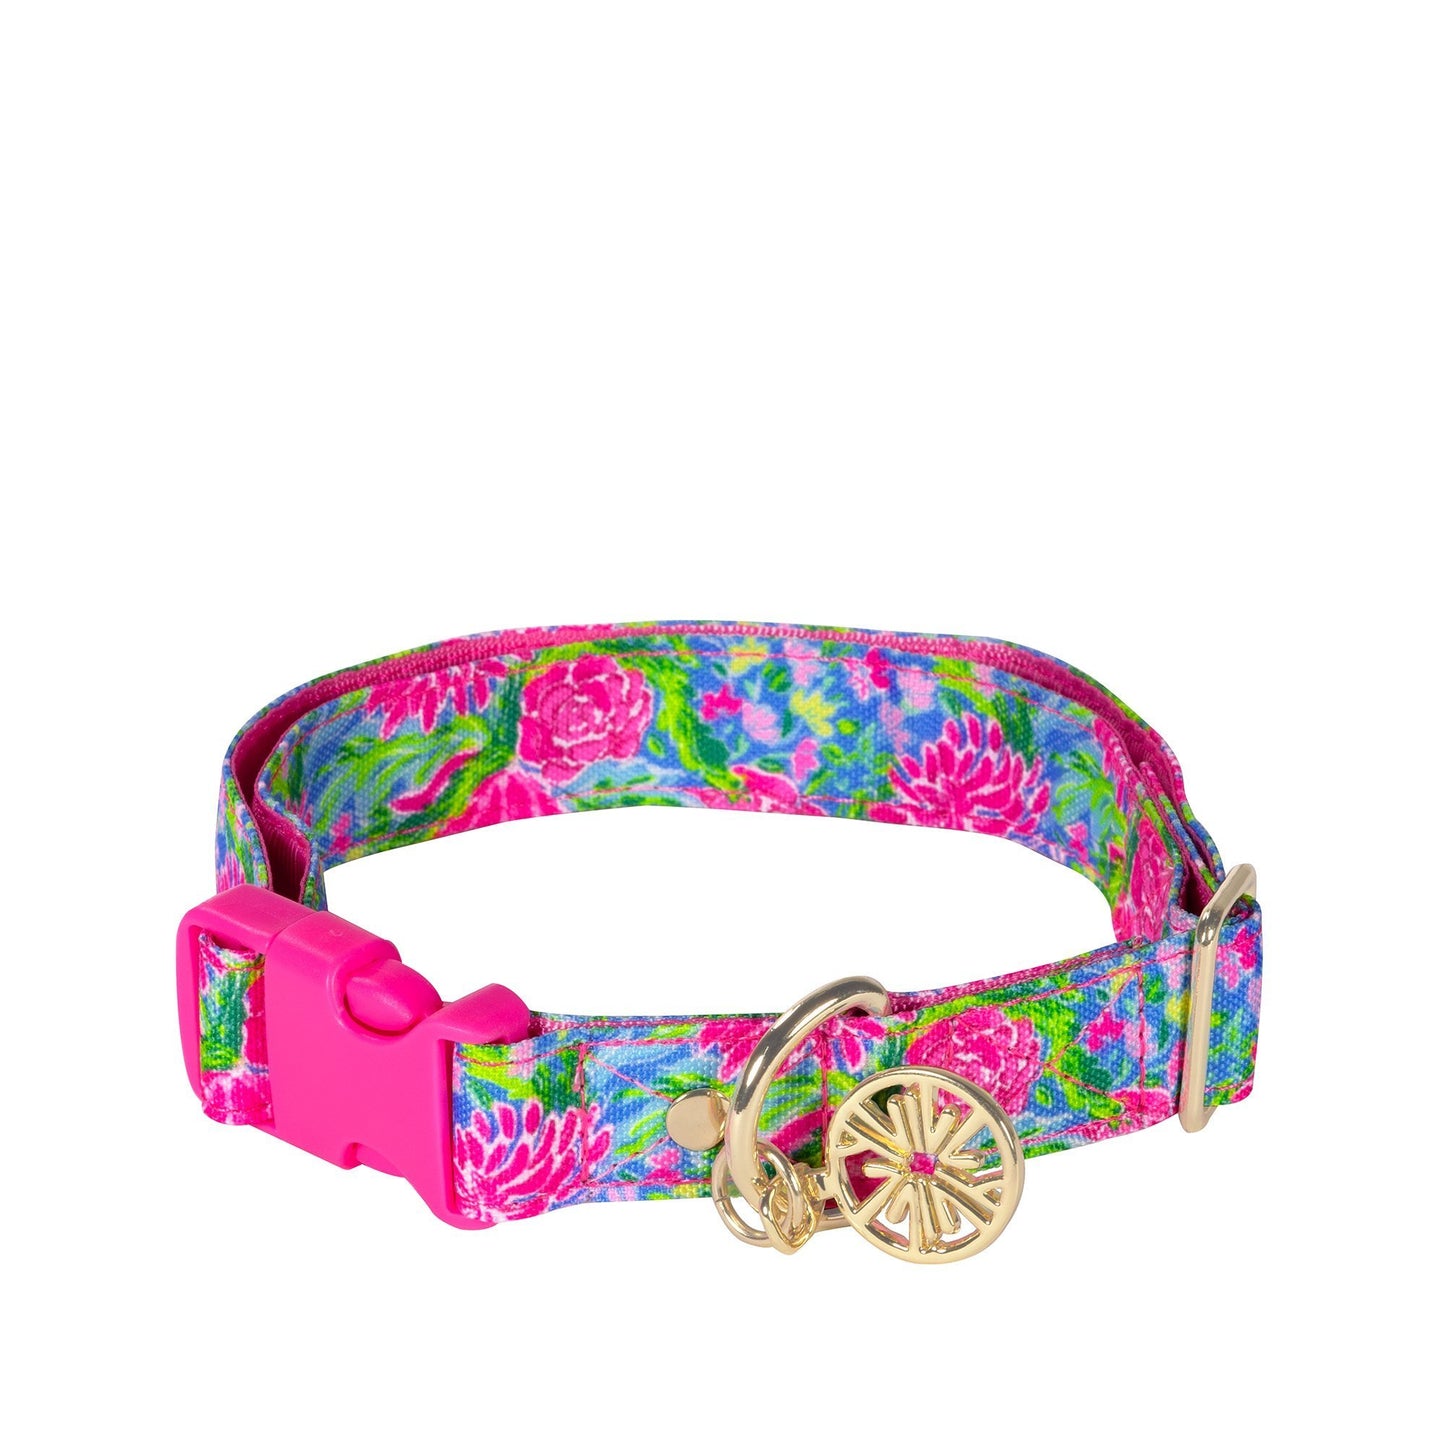 Lilly Pulitzer Dog Collar in Bunny Business Small